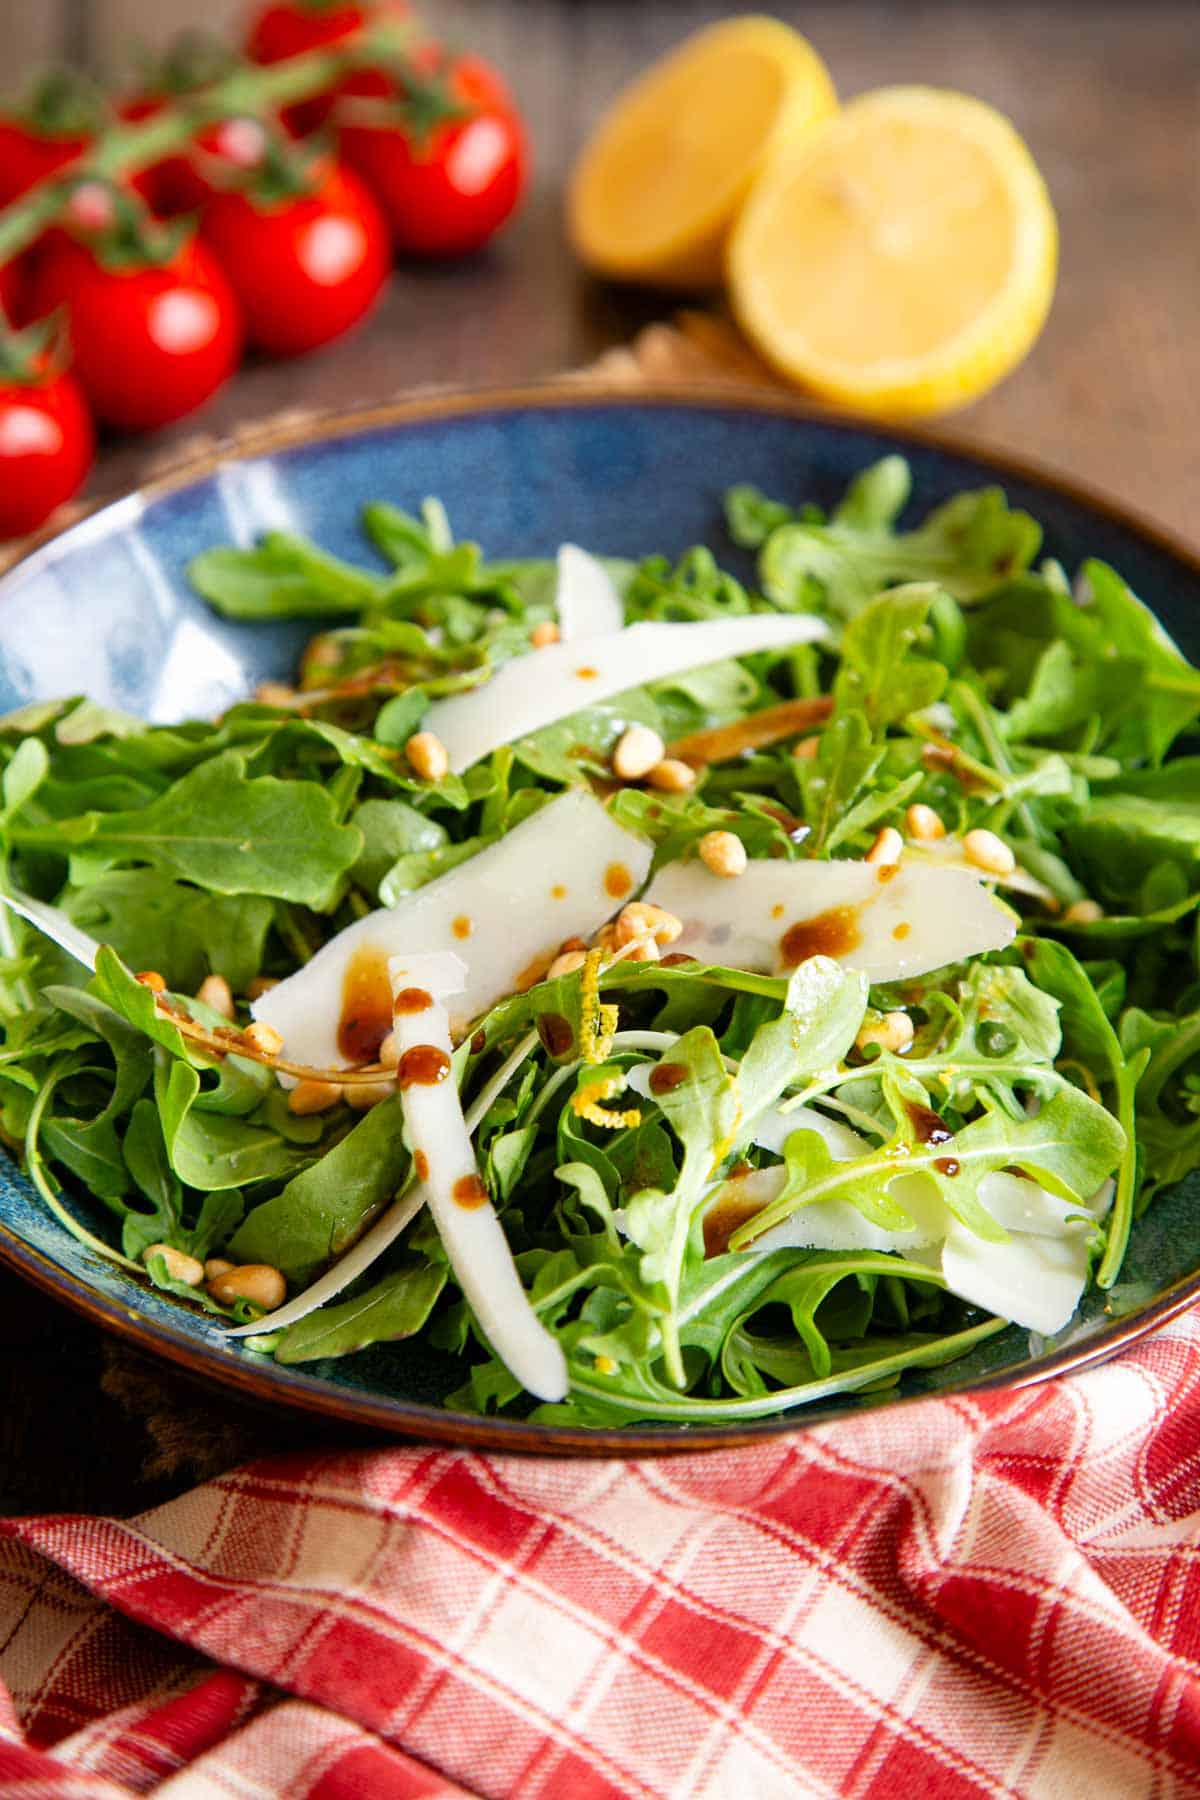 Fresh and vibrant, green rocket or arugula salad with parmesan shavings, pine kernels and a drizzle of balsamic dressing.